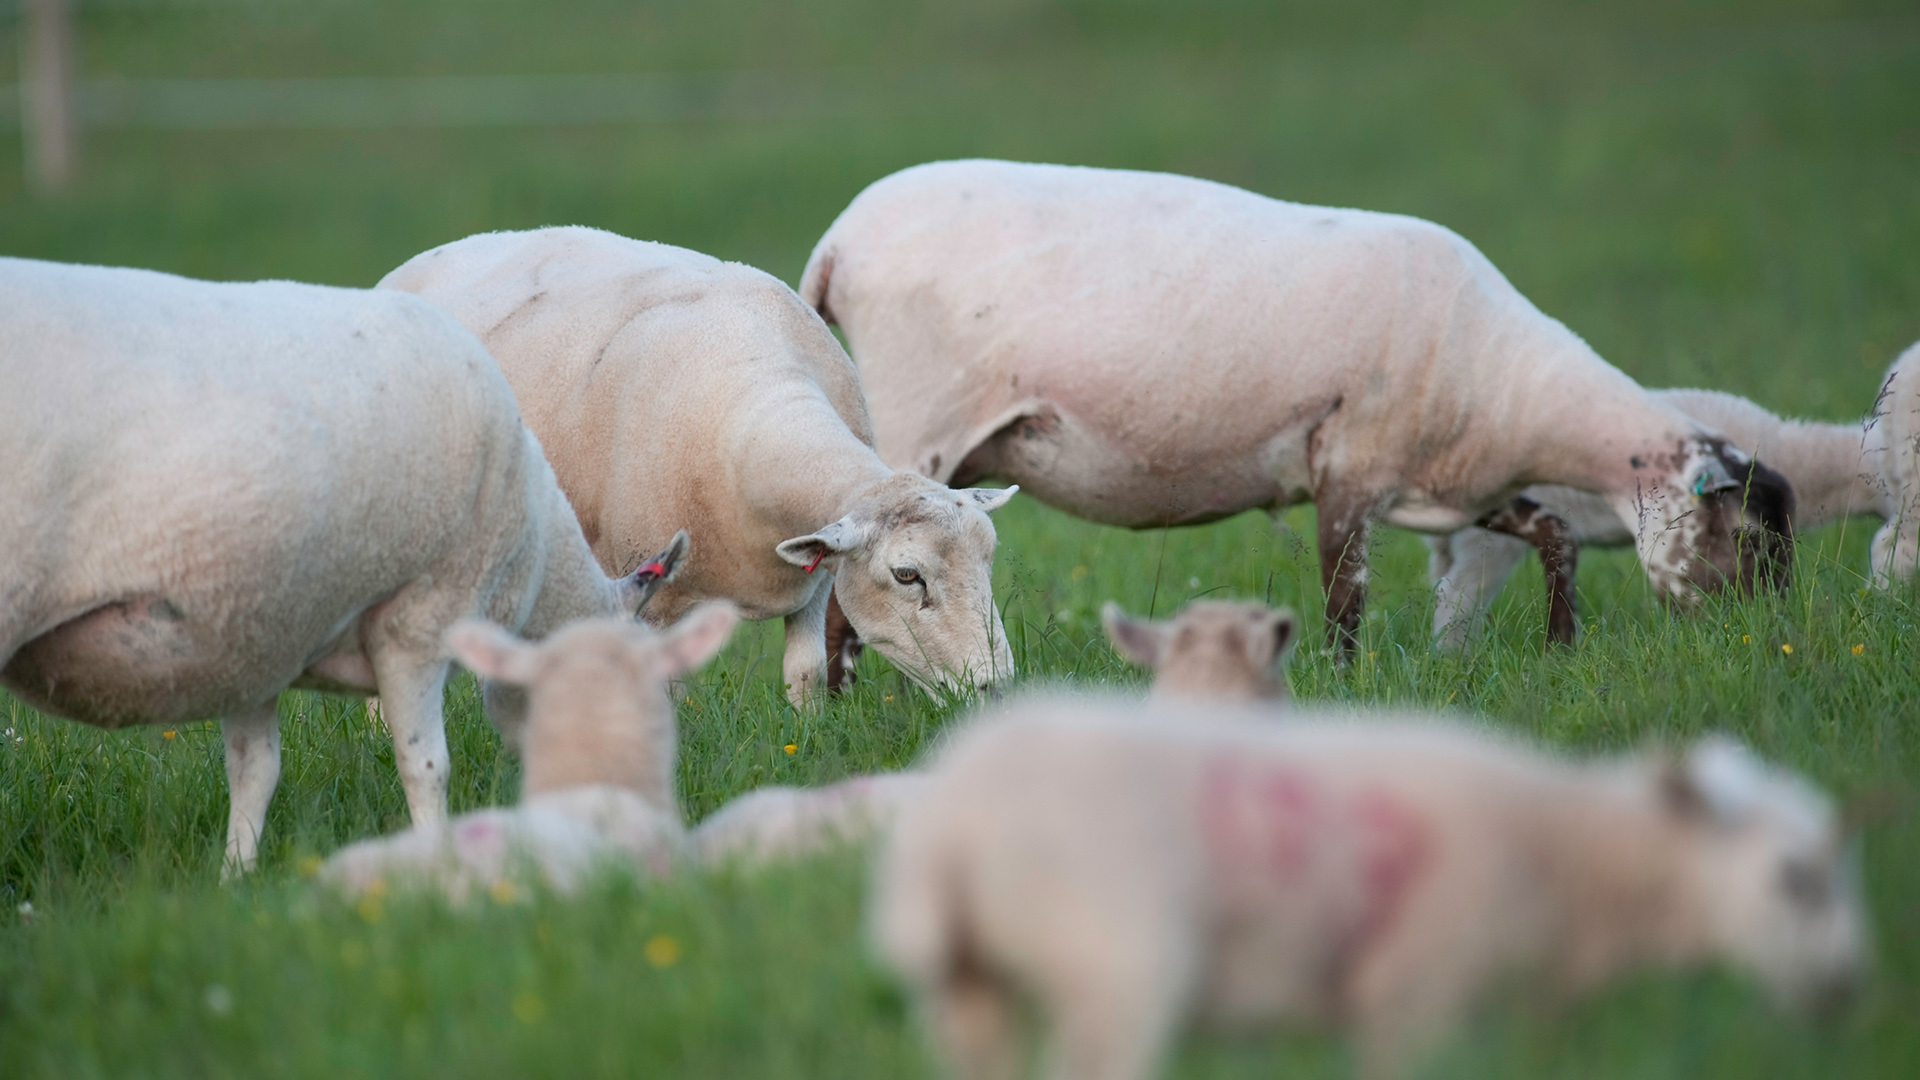 Expert advice on colostrum management for lambs